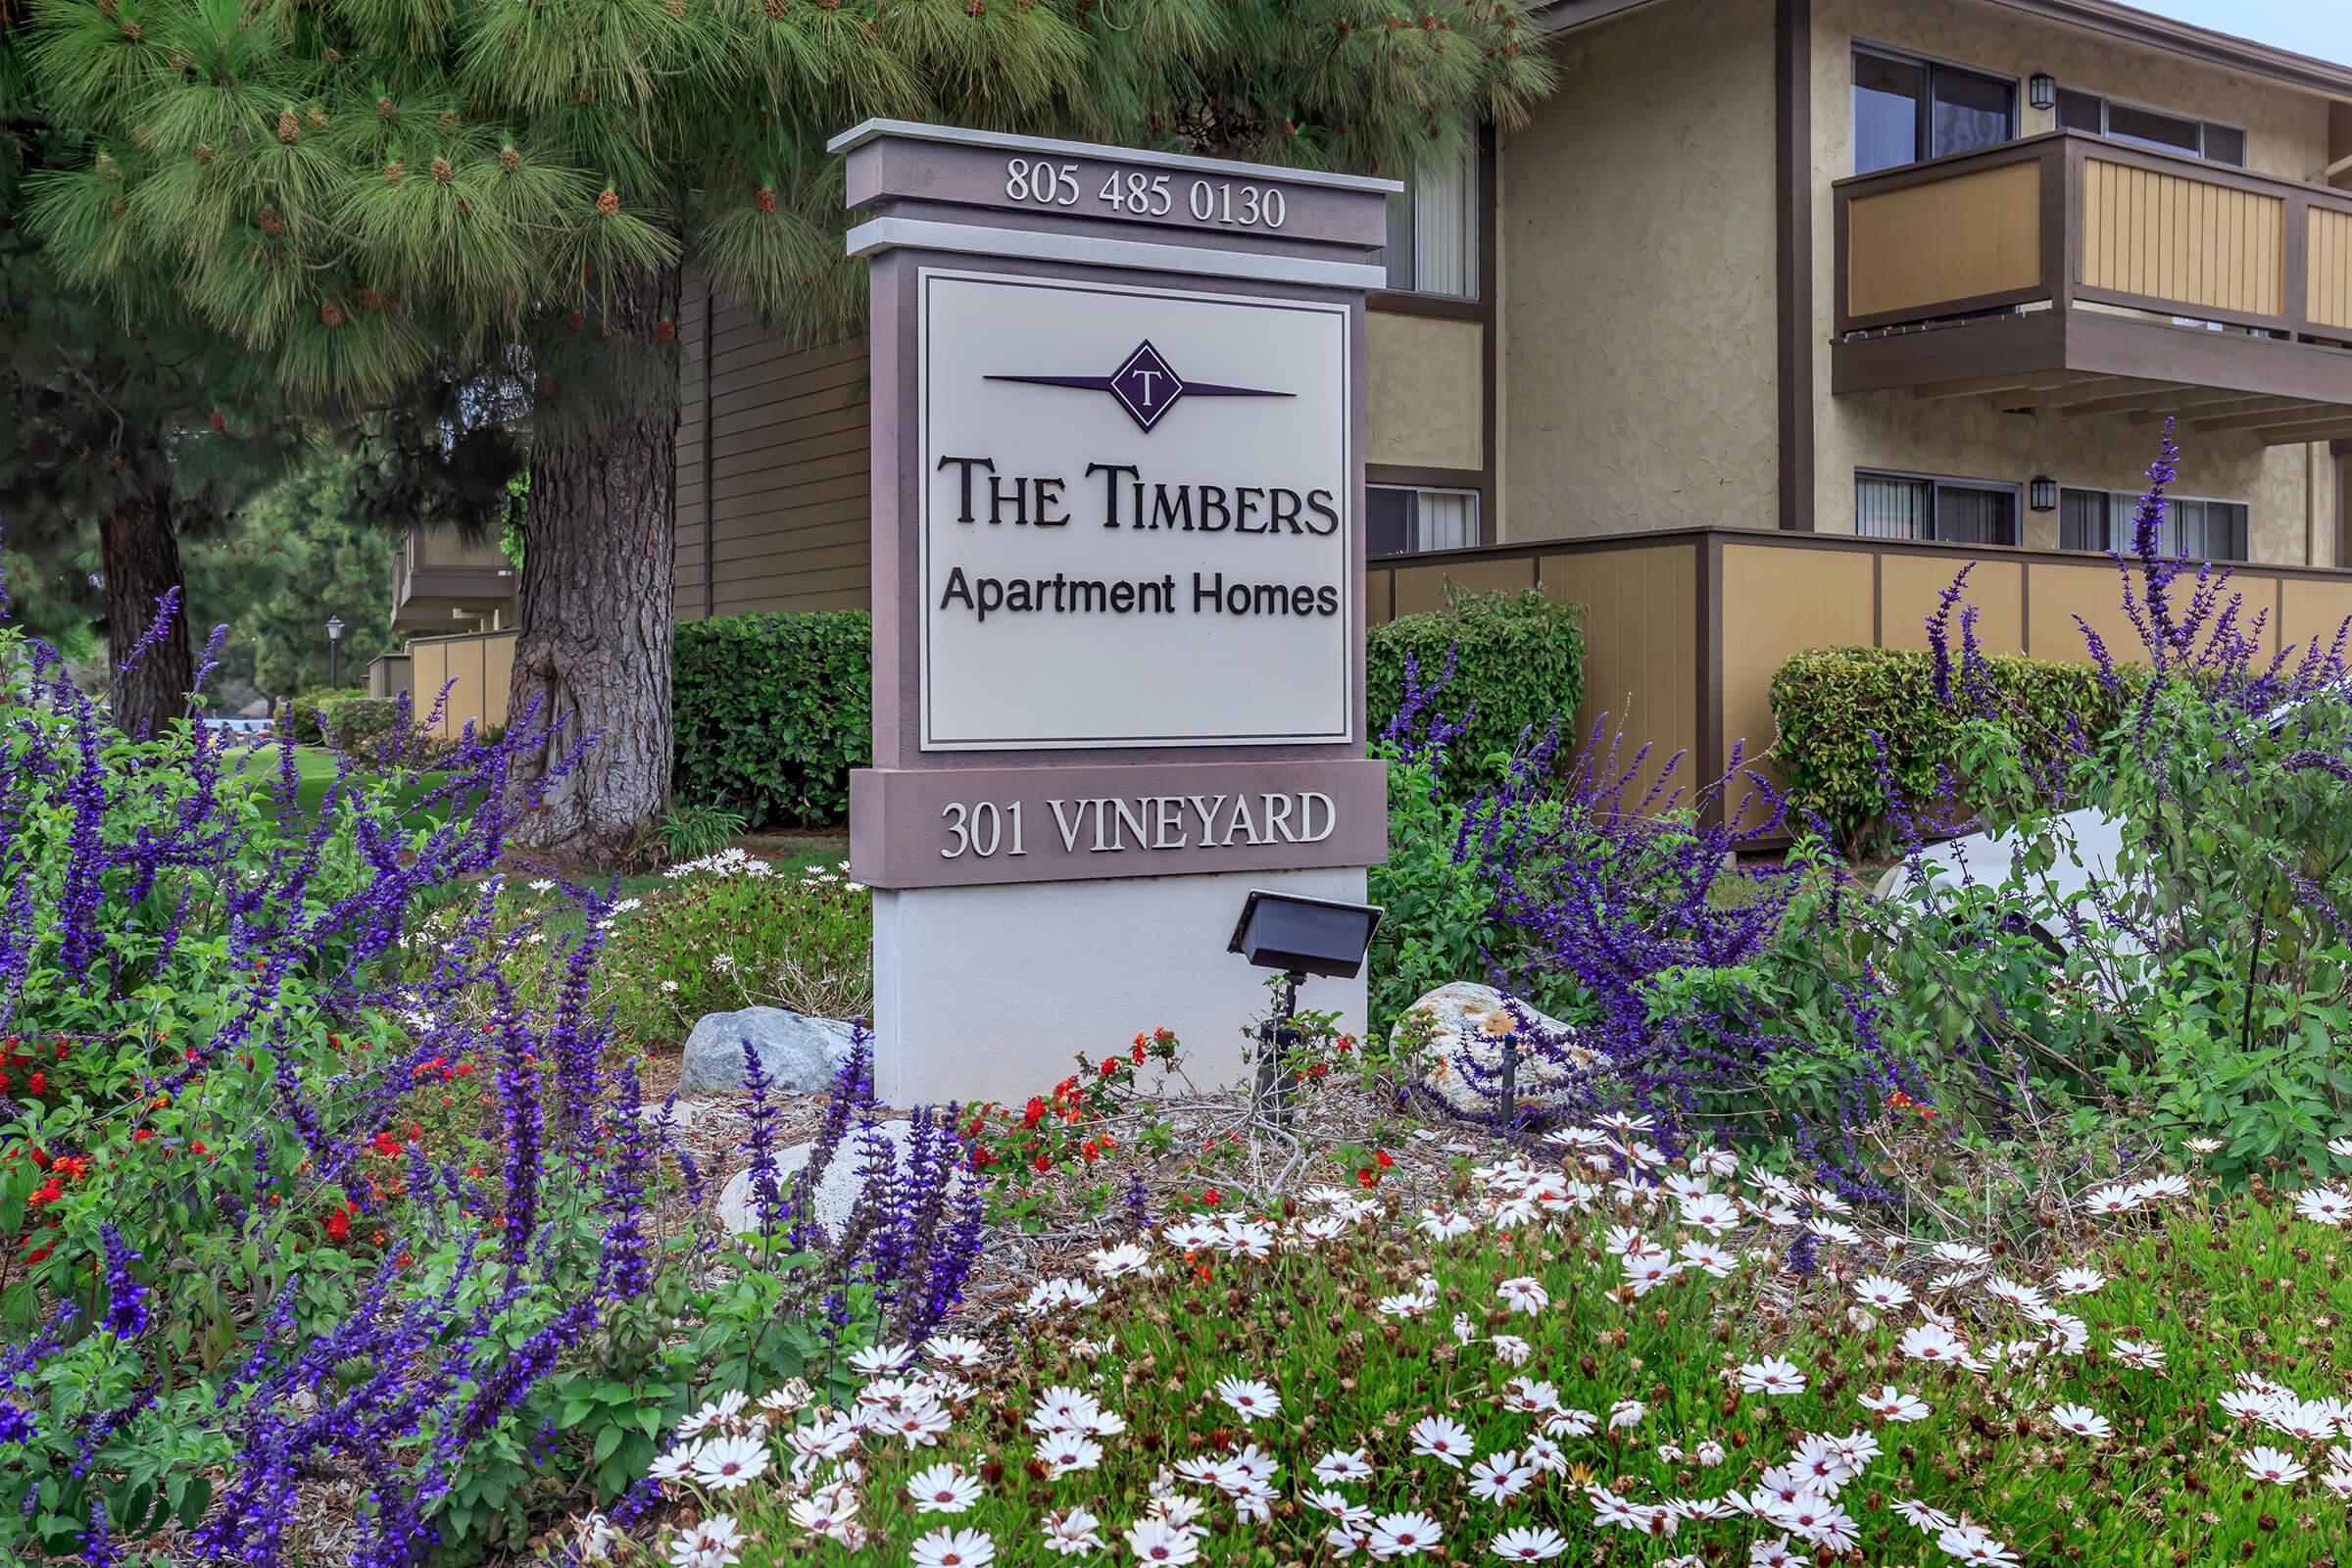 The Timbers Apartment Homes monument sign